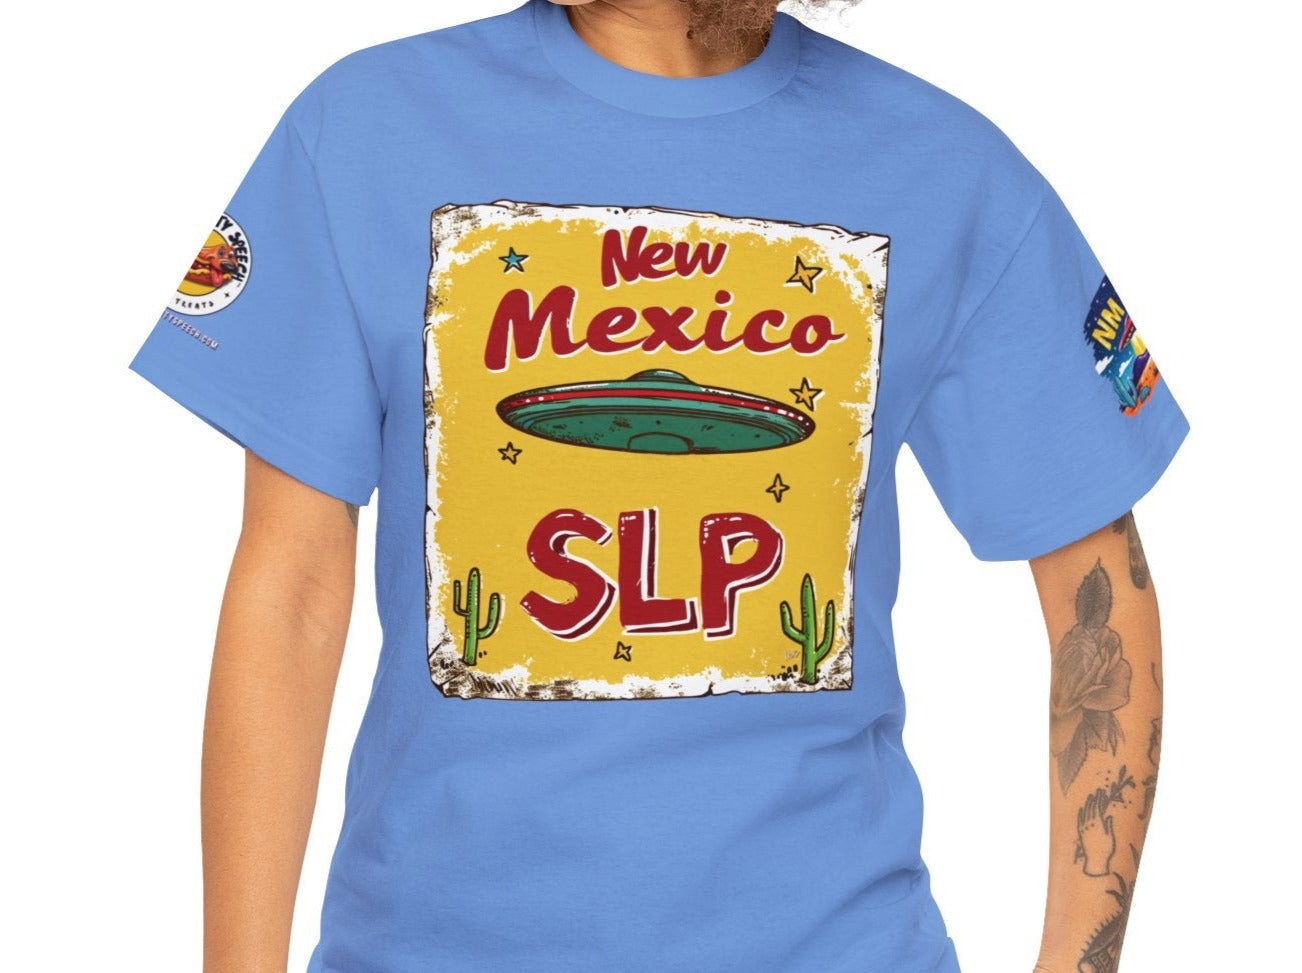 New Mexico SLP #1 Speech Therapy Shirt